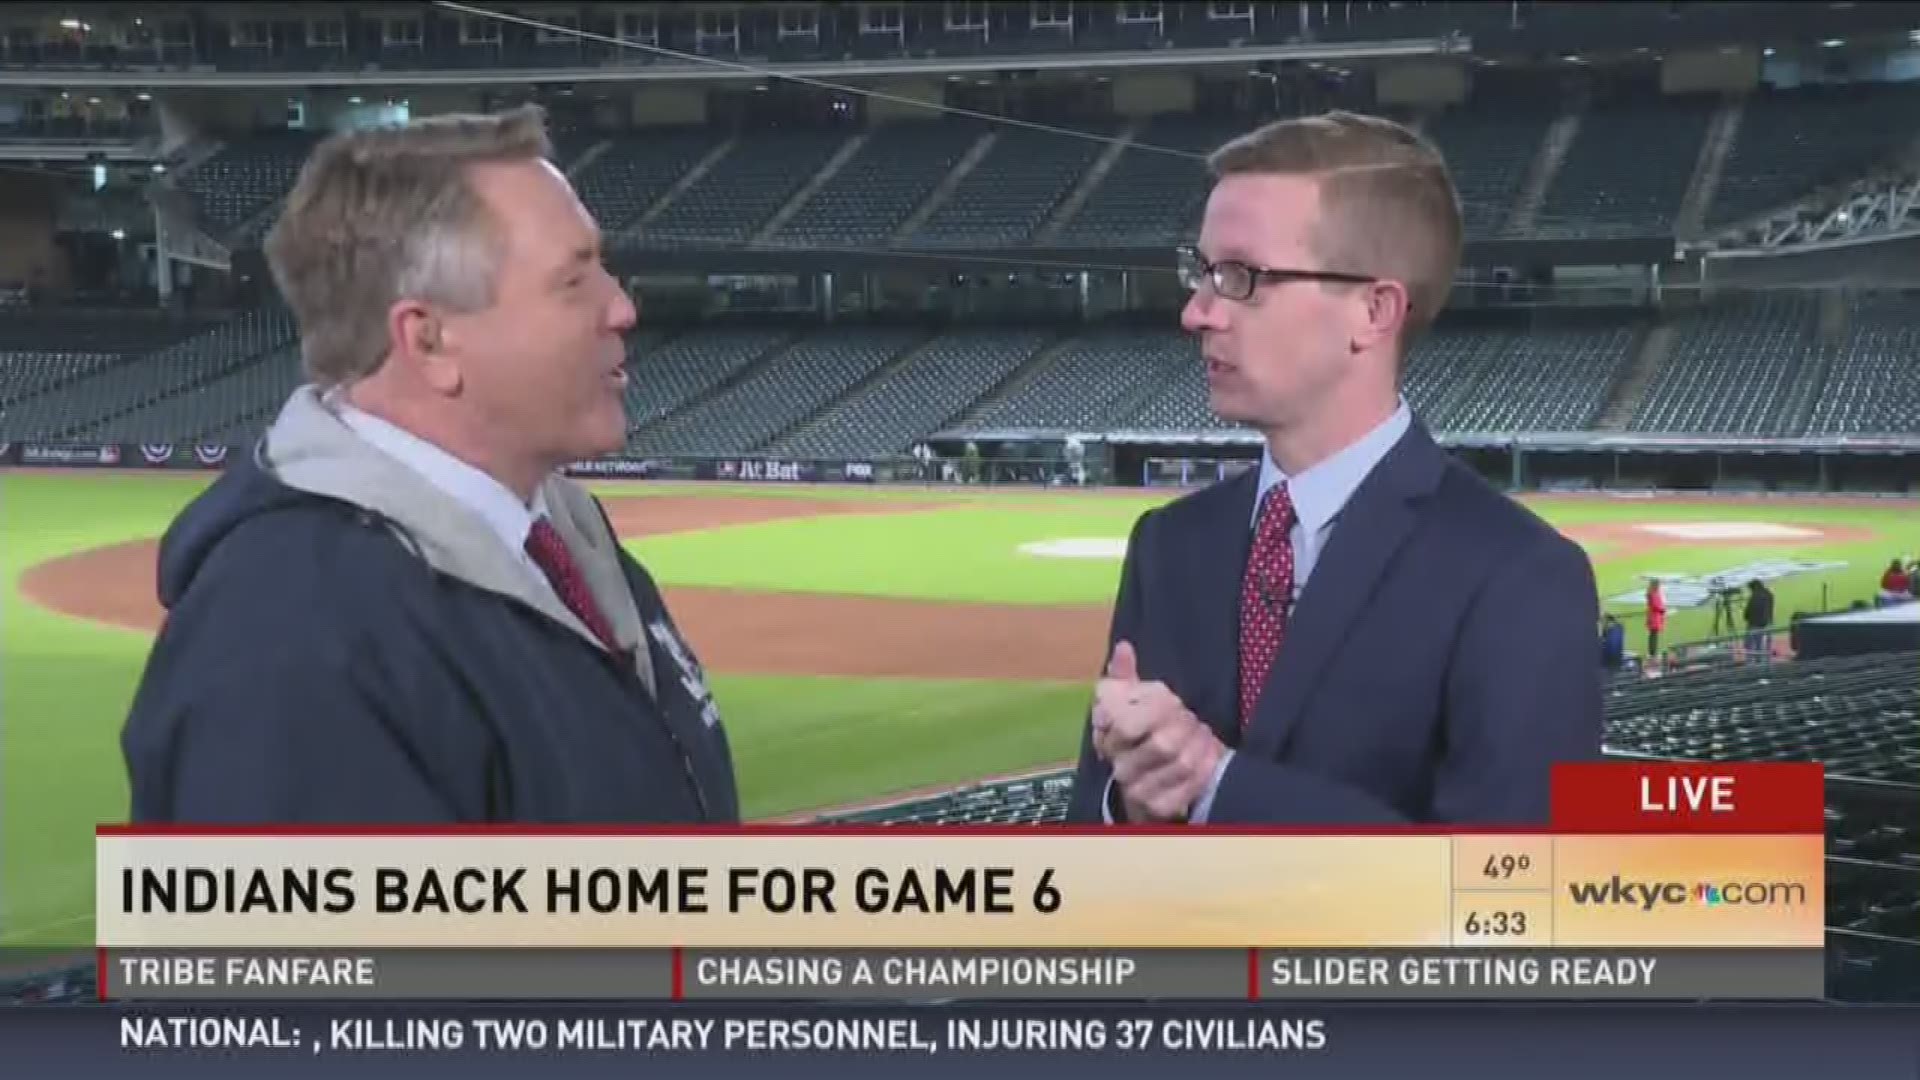 Nov. 1, 2016: Joel Hammond of the Cleveland Indians offers a preview of what to expect at Game 6 of the World Series at Progressive Field.